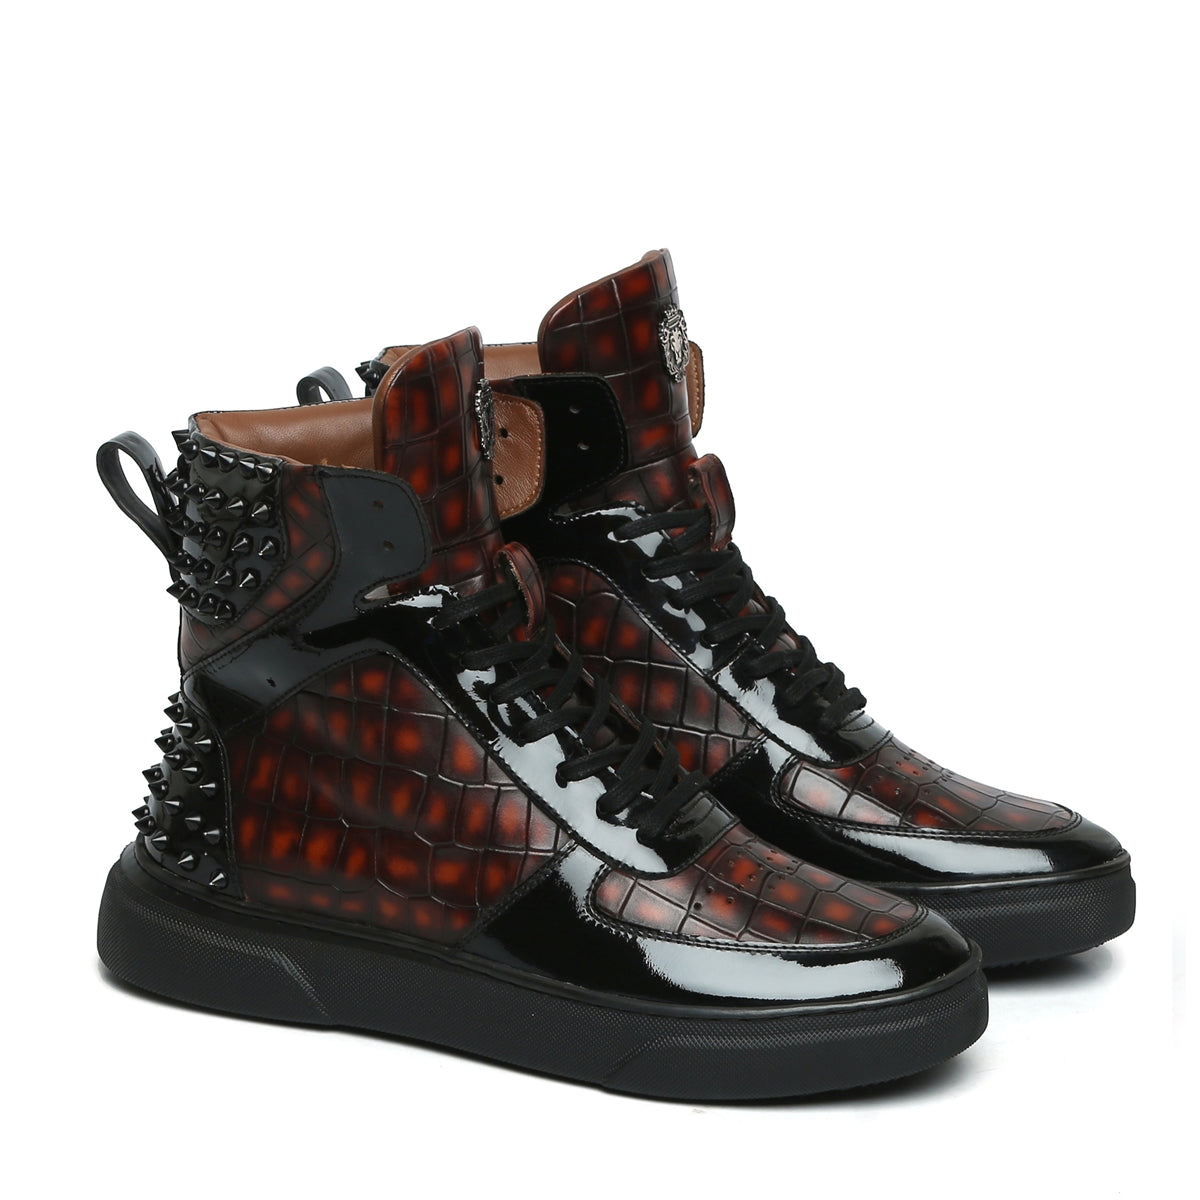 Studded Smokey Cognac Sneakers in Deep Cut Leather with Patent Leather Detailing